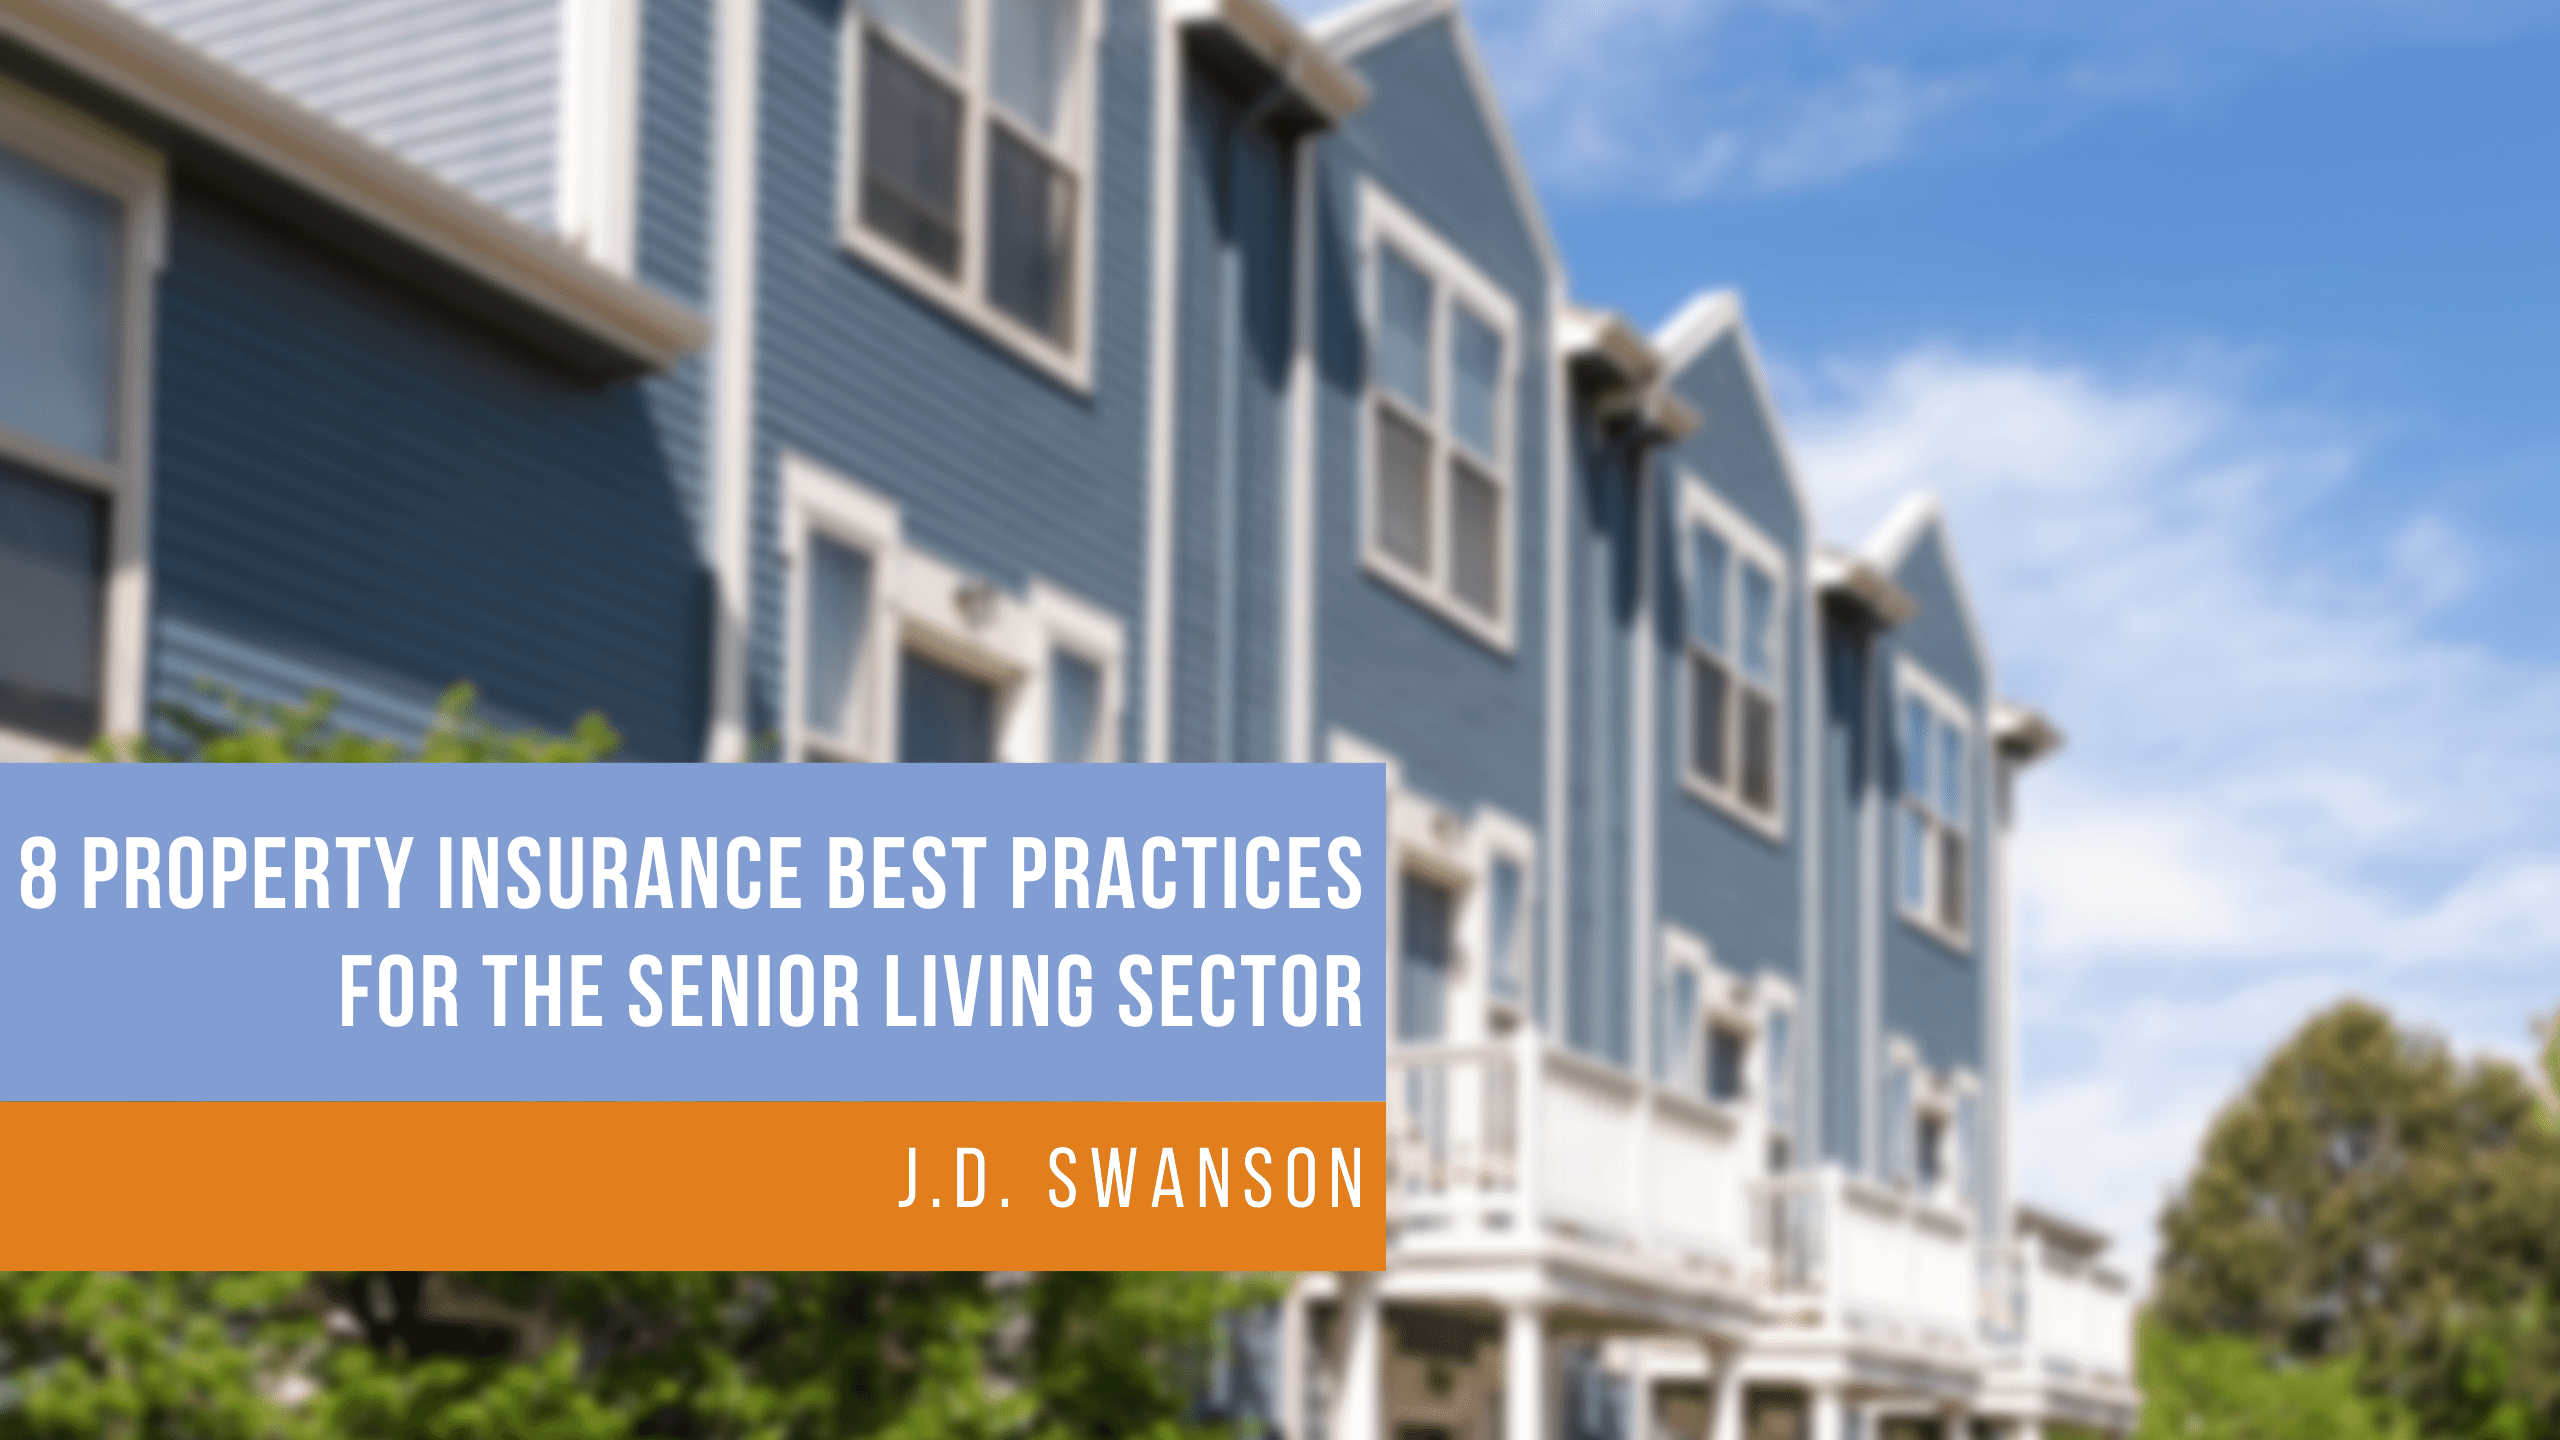 8 Property Insurance Best Practices for the Senior Living Sector